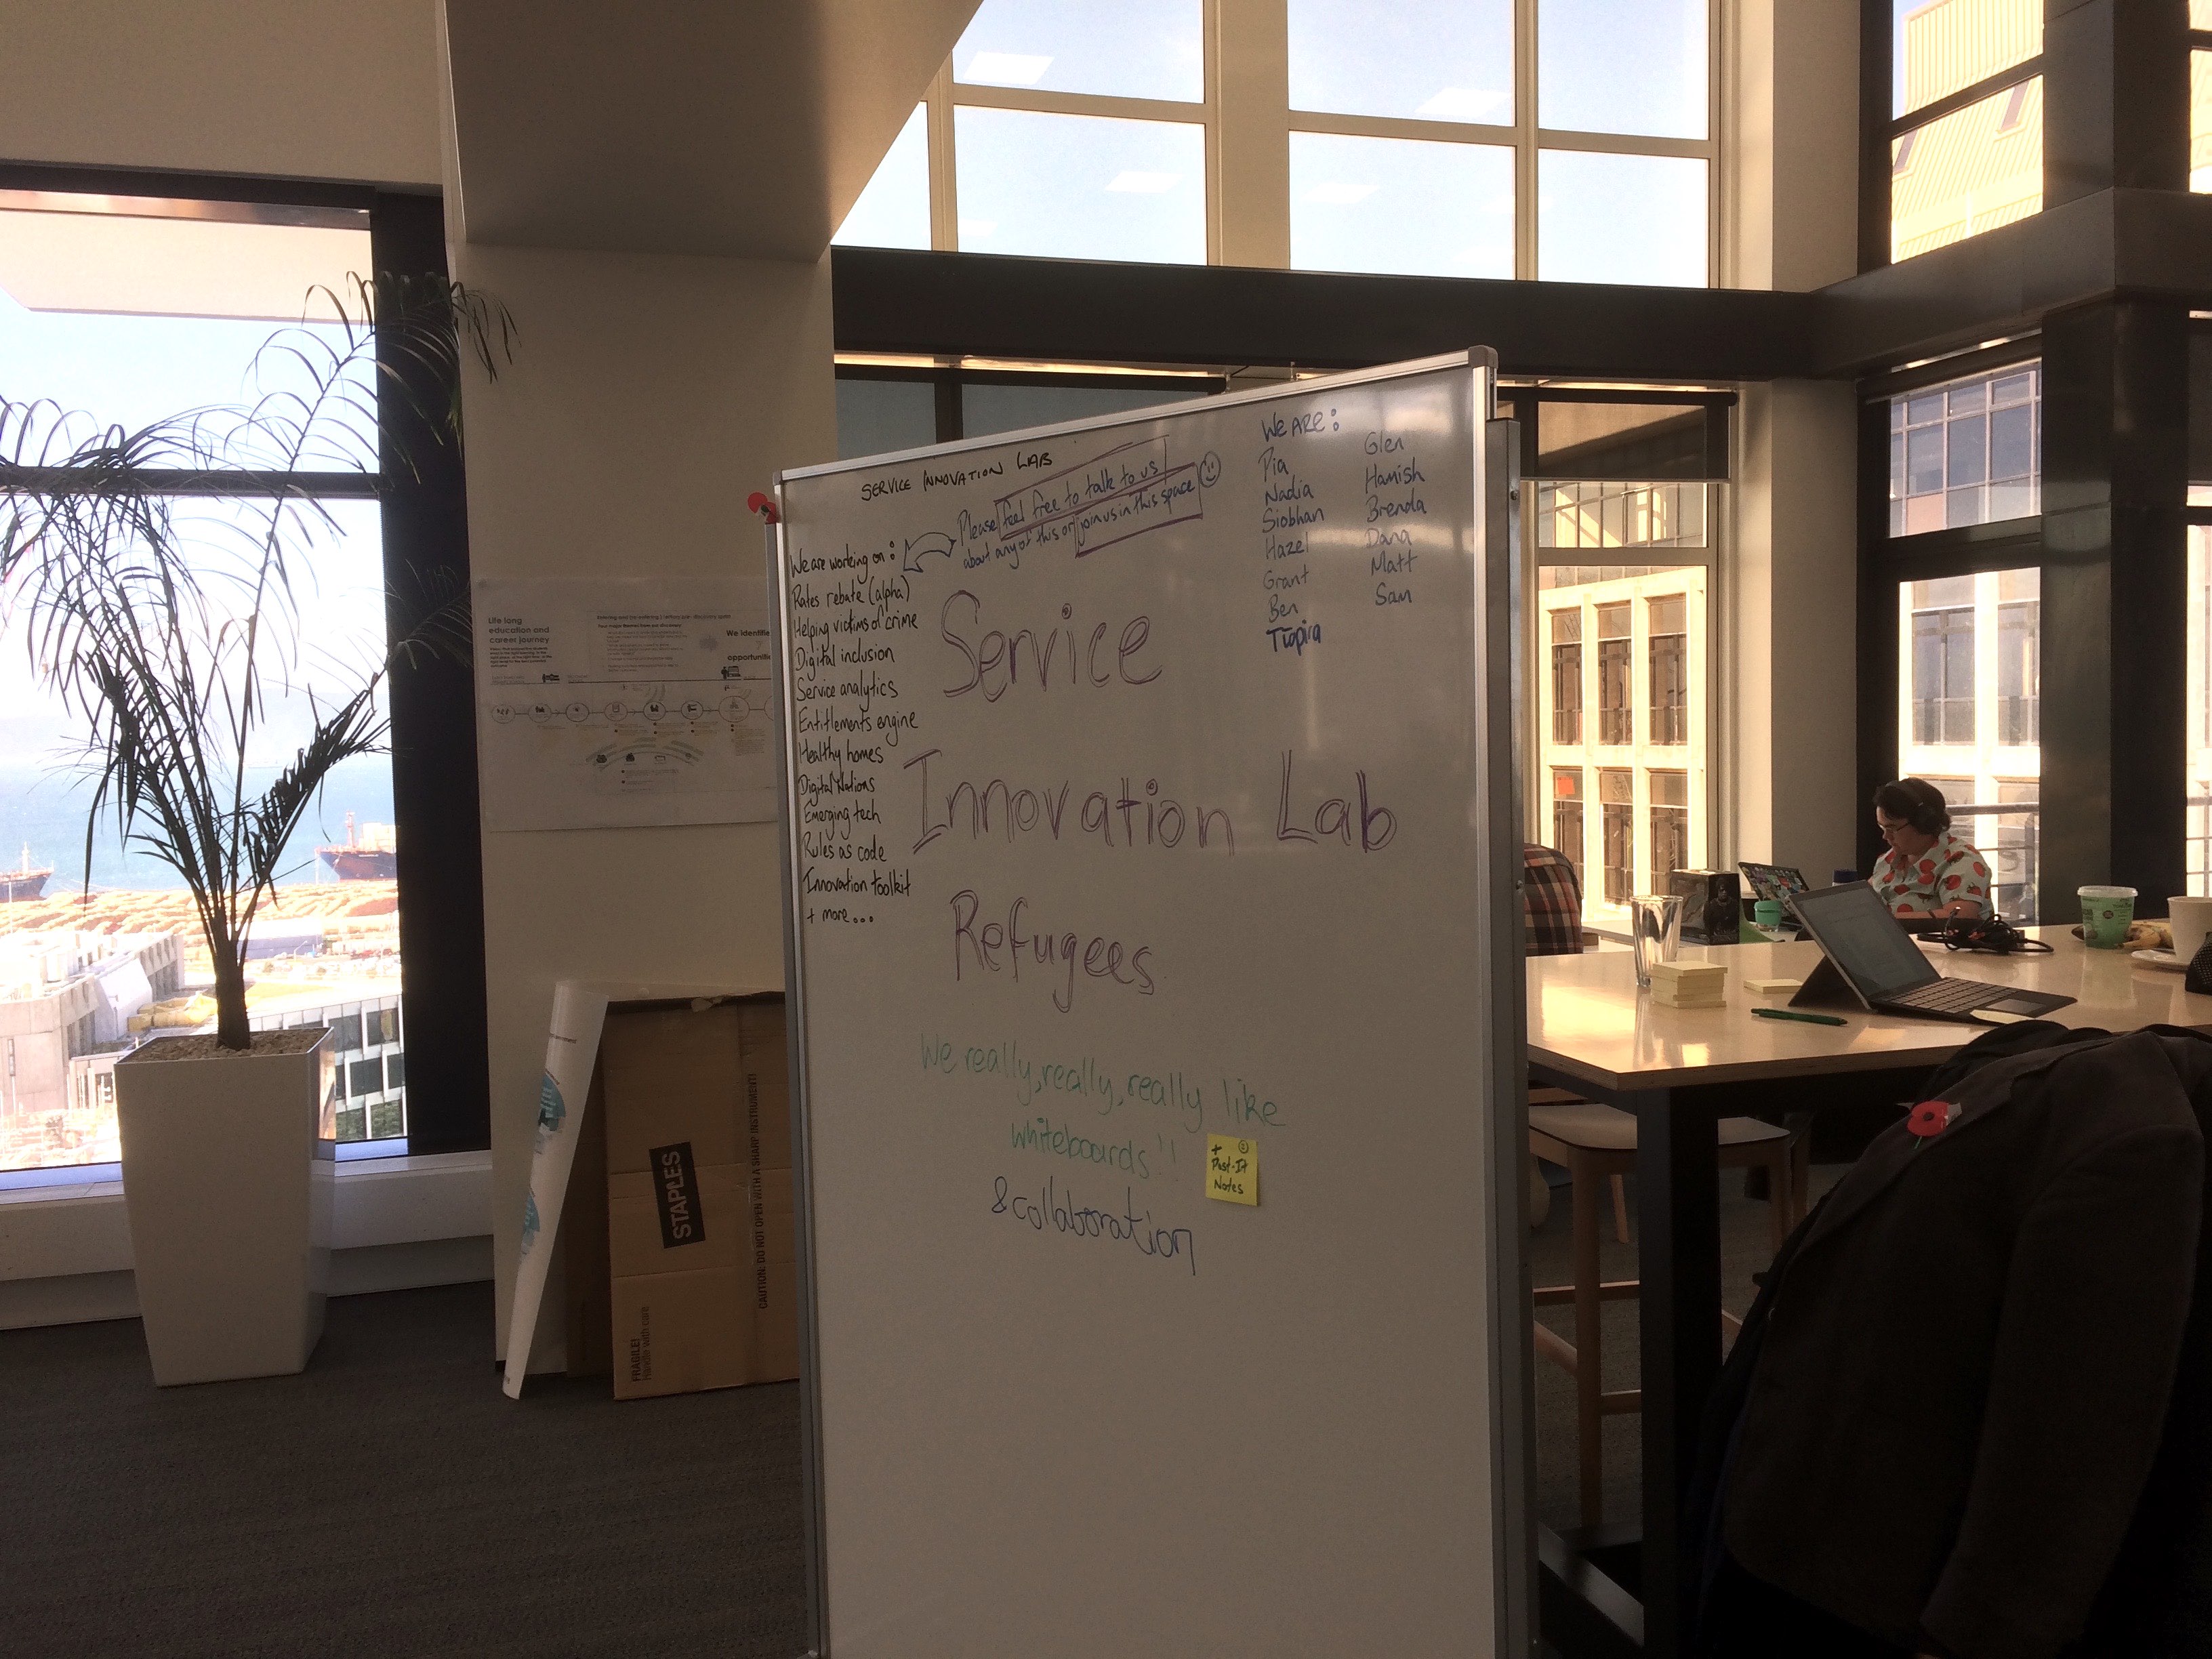 Two persons work behind a whiteboard where “Service Innovation Lab Refugees” can be read.